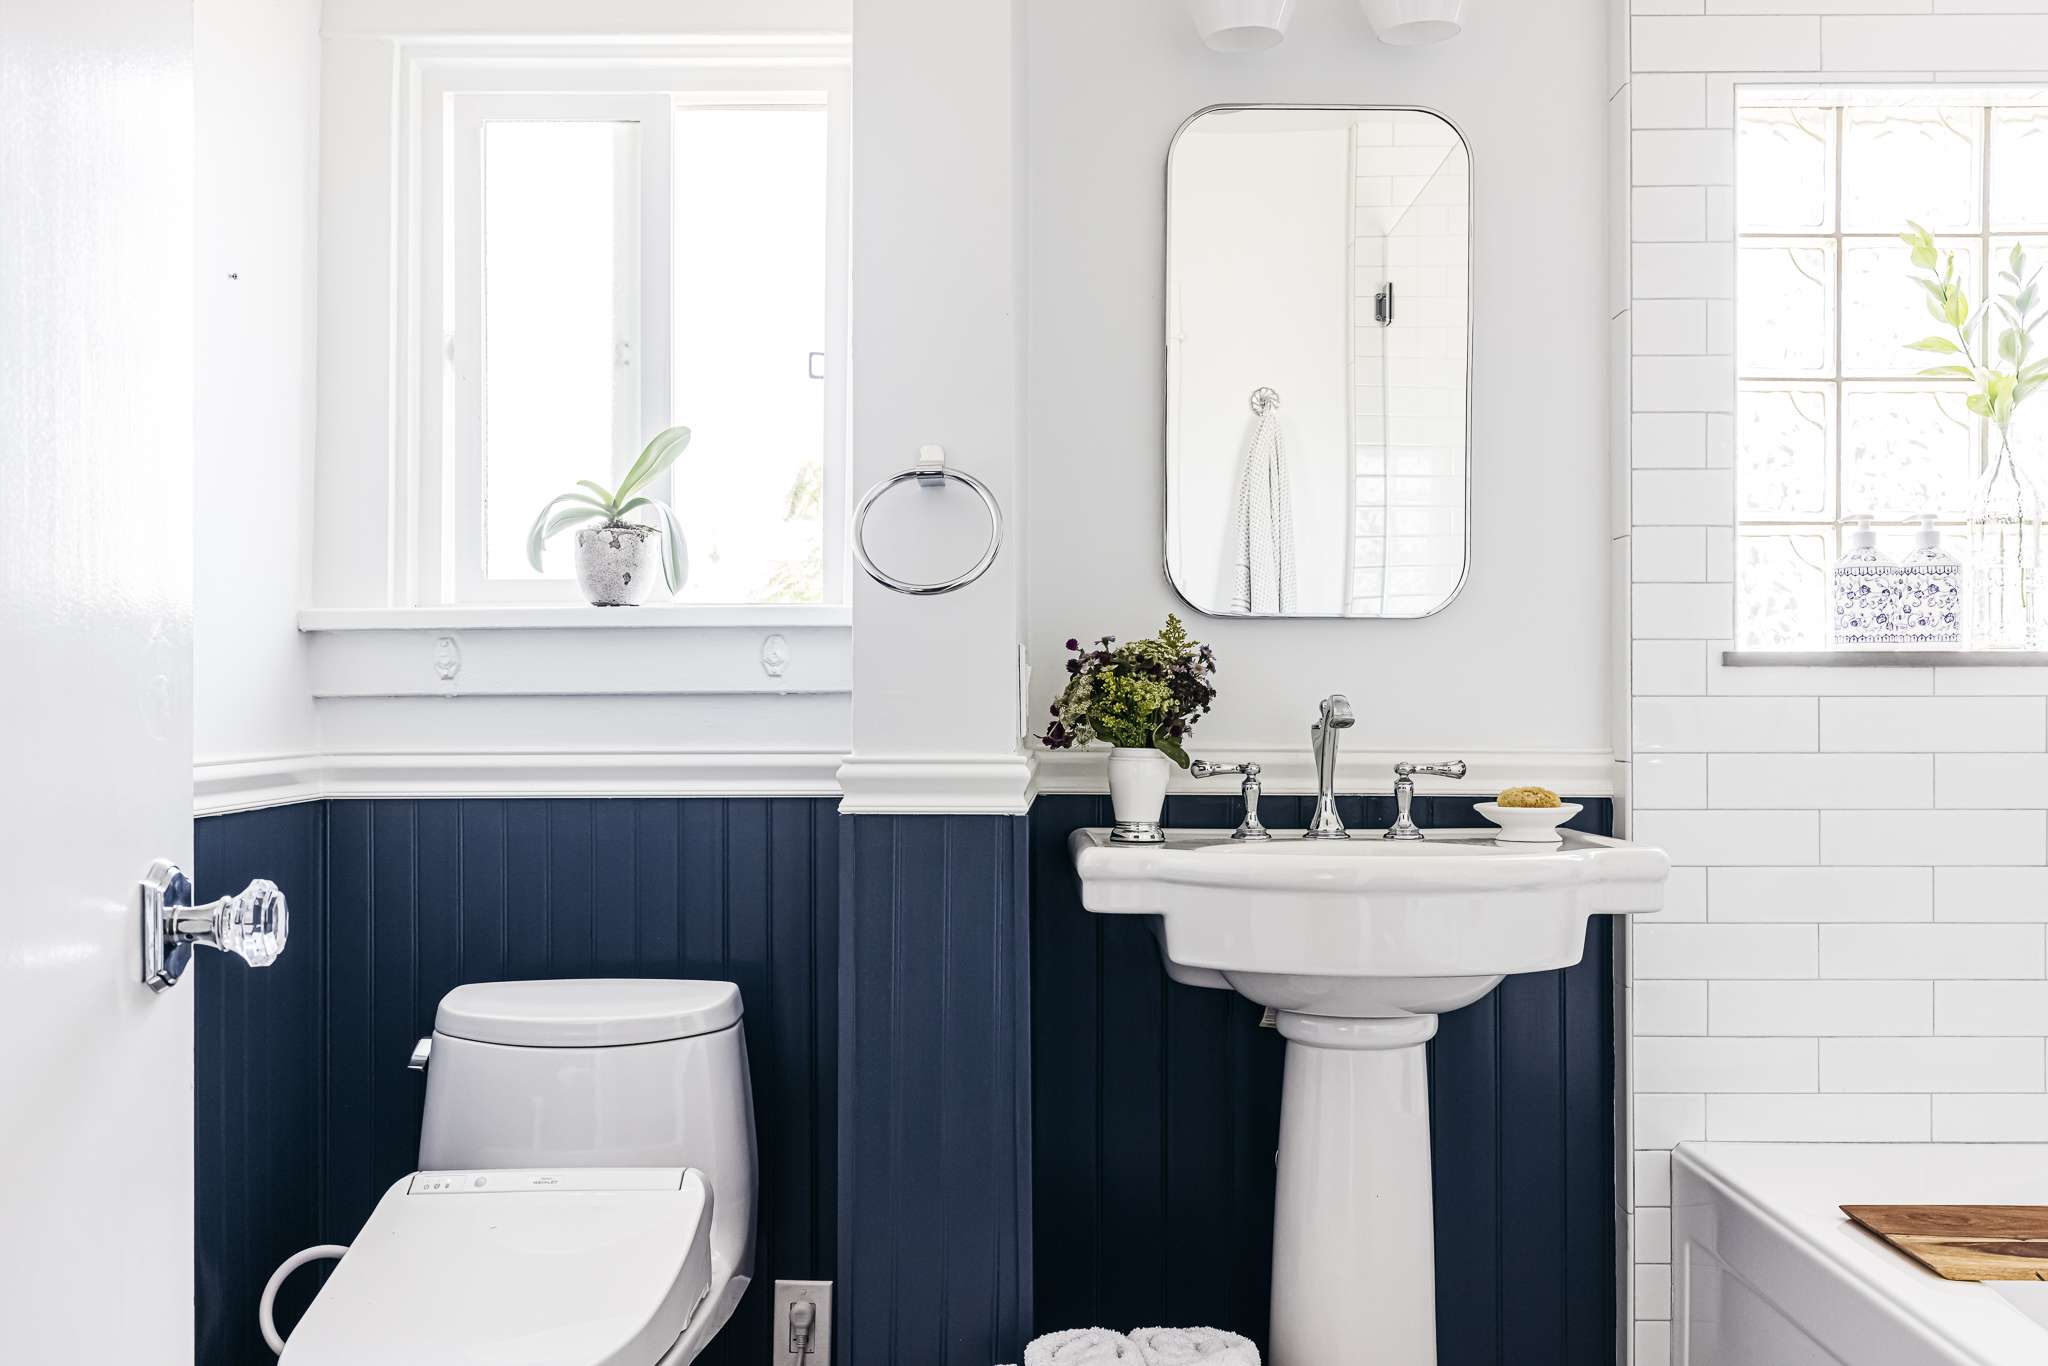 Bathroom Wall Panels - The Complete Guide To Choosing & Fitting